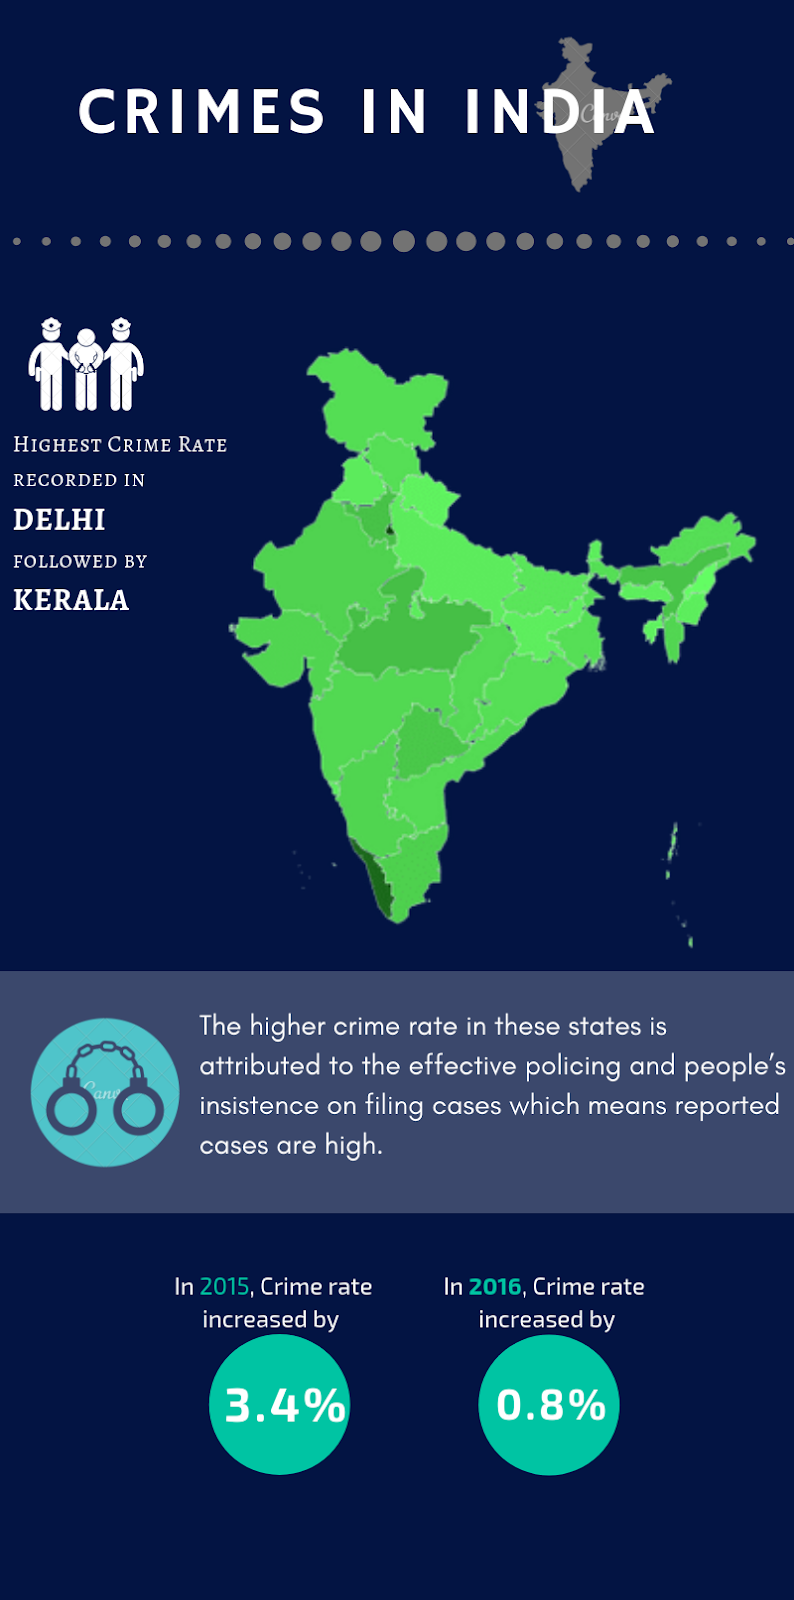 this is an infographic representing crimes in India.